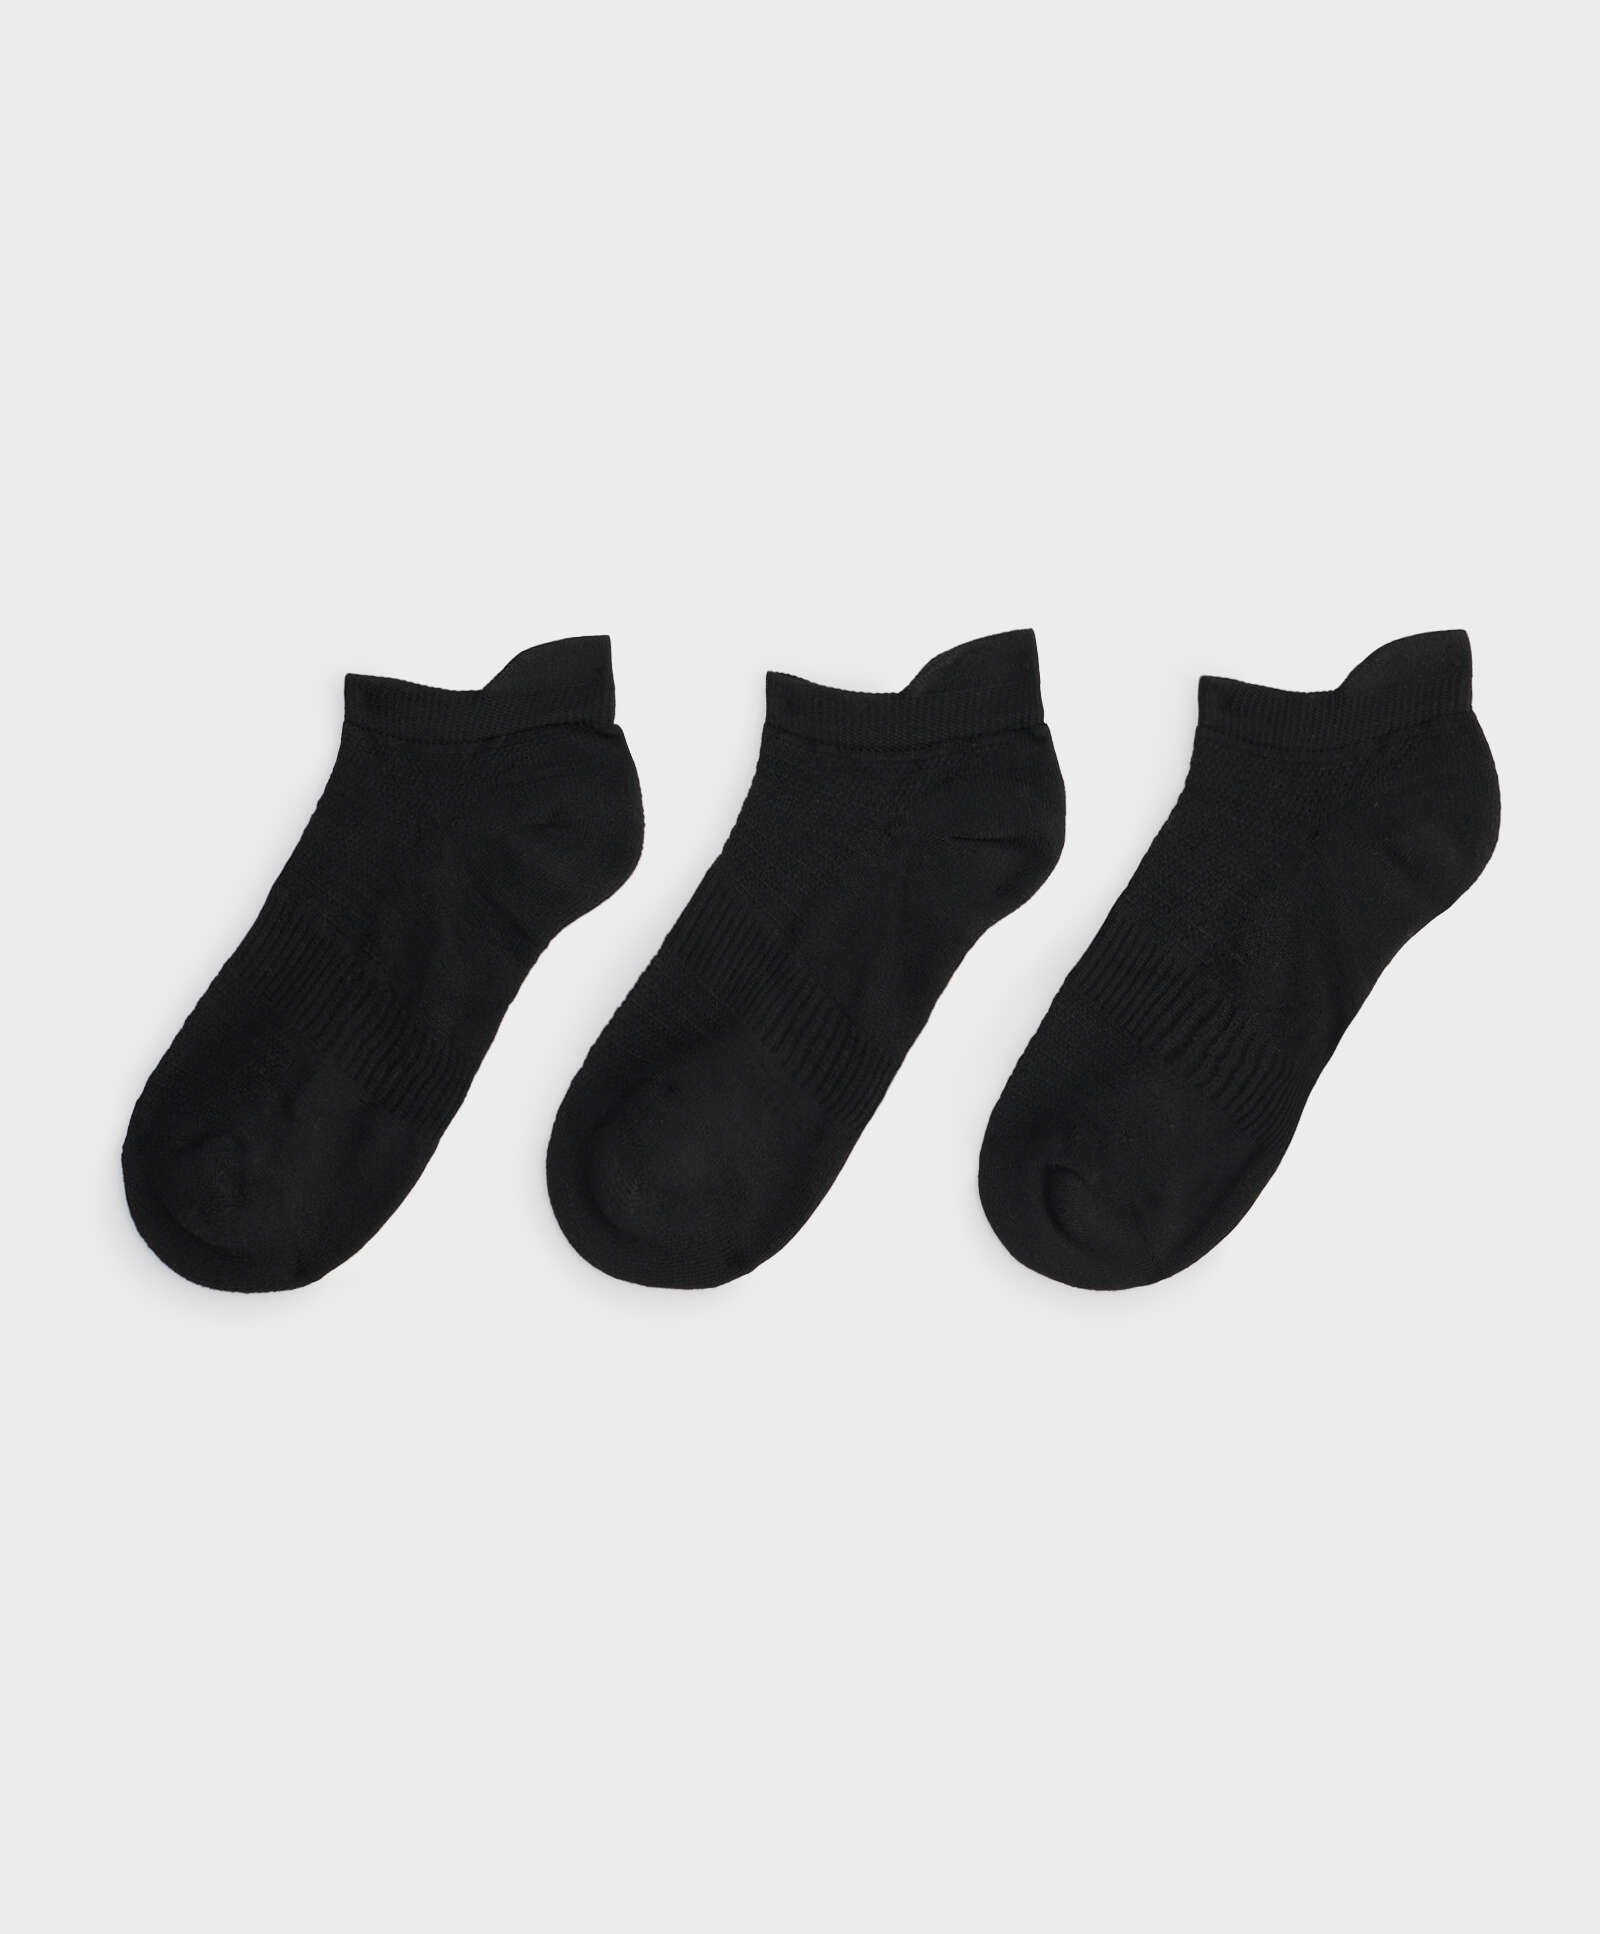 3 pairs of sports trainer socks